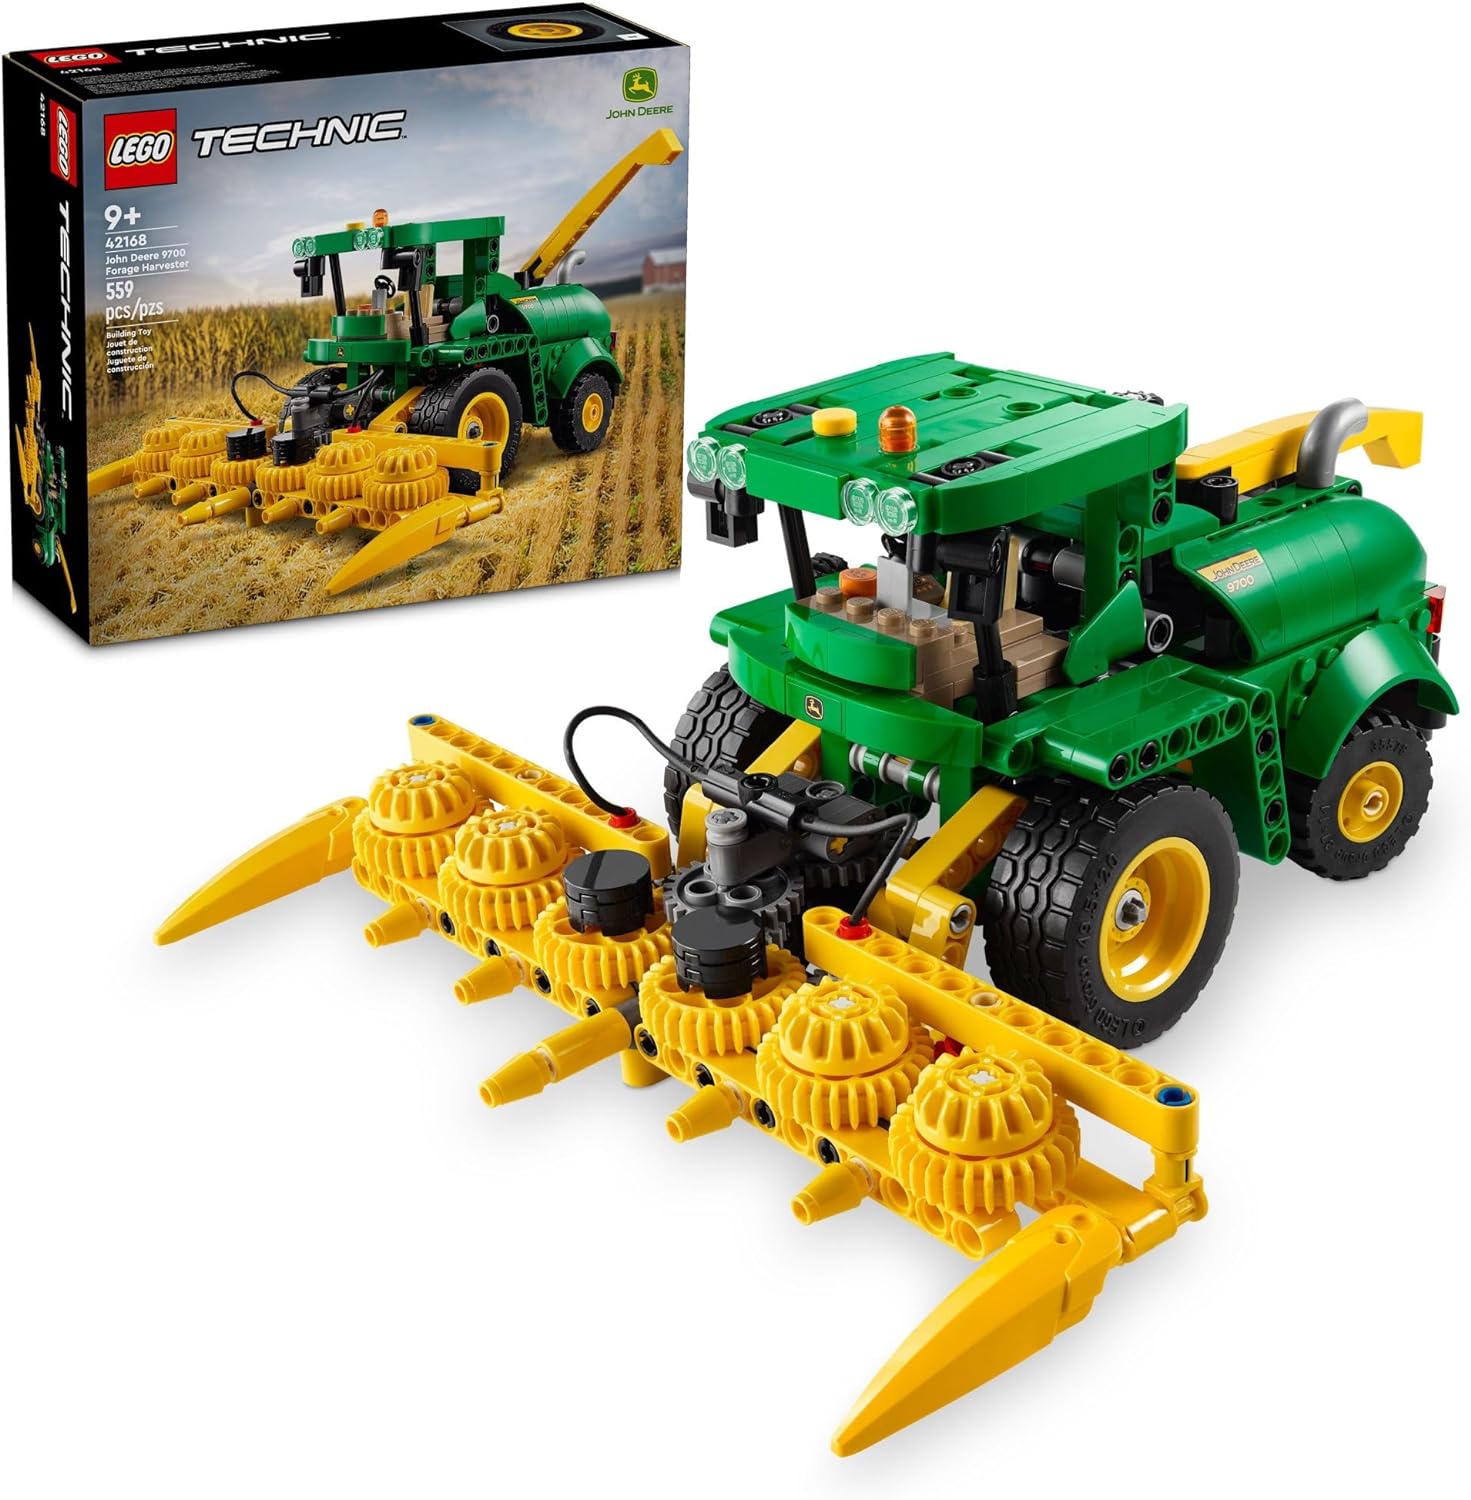 LEGO Technic John Deere 9700 Forage Harvester Tractor Toy_ Buildable Farm Toy for Imaginative Play_